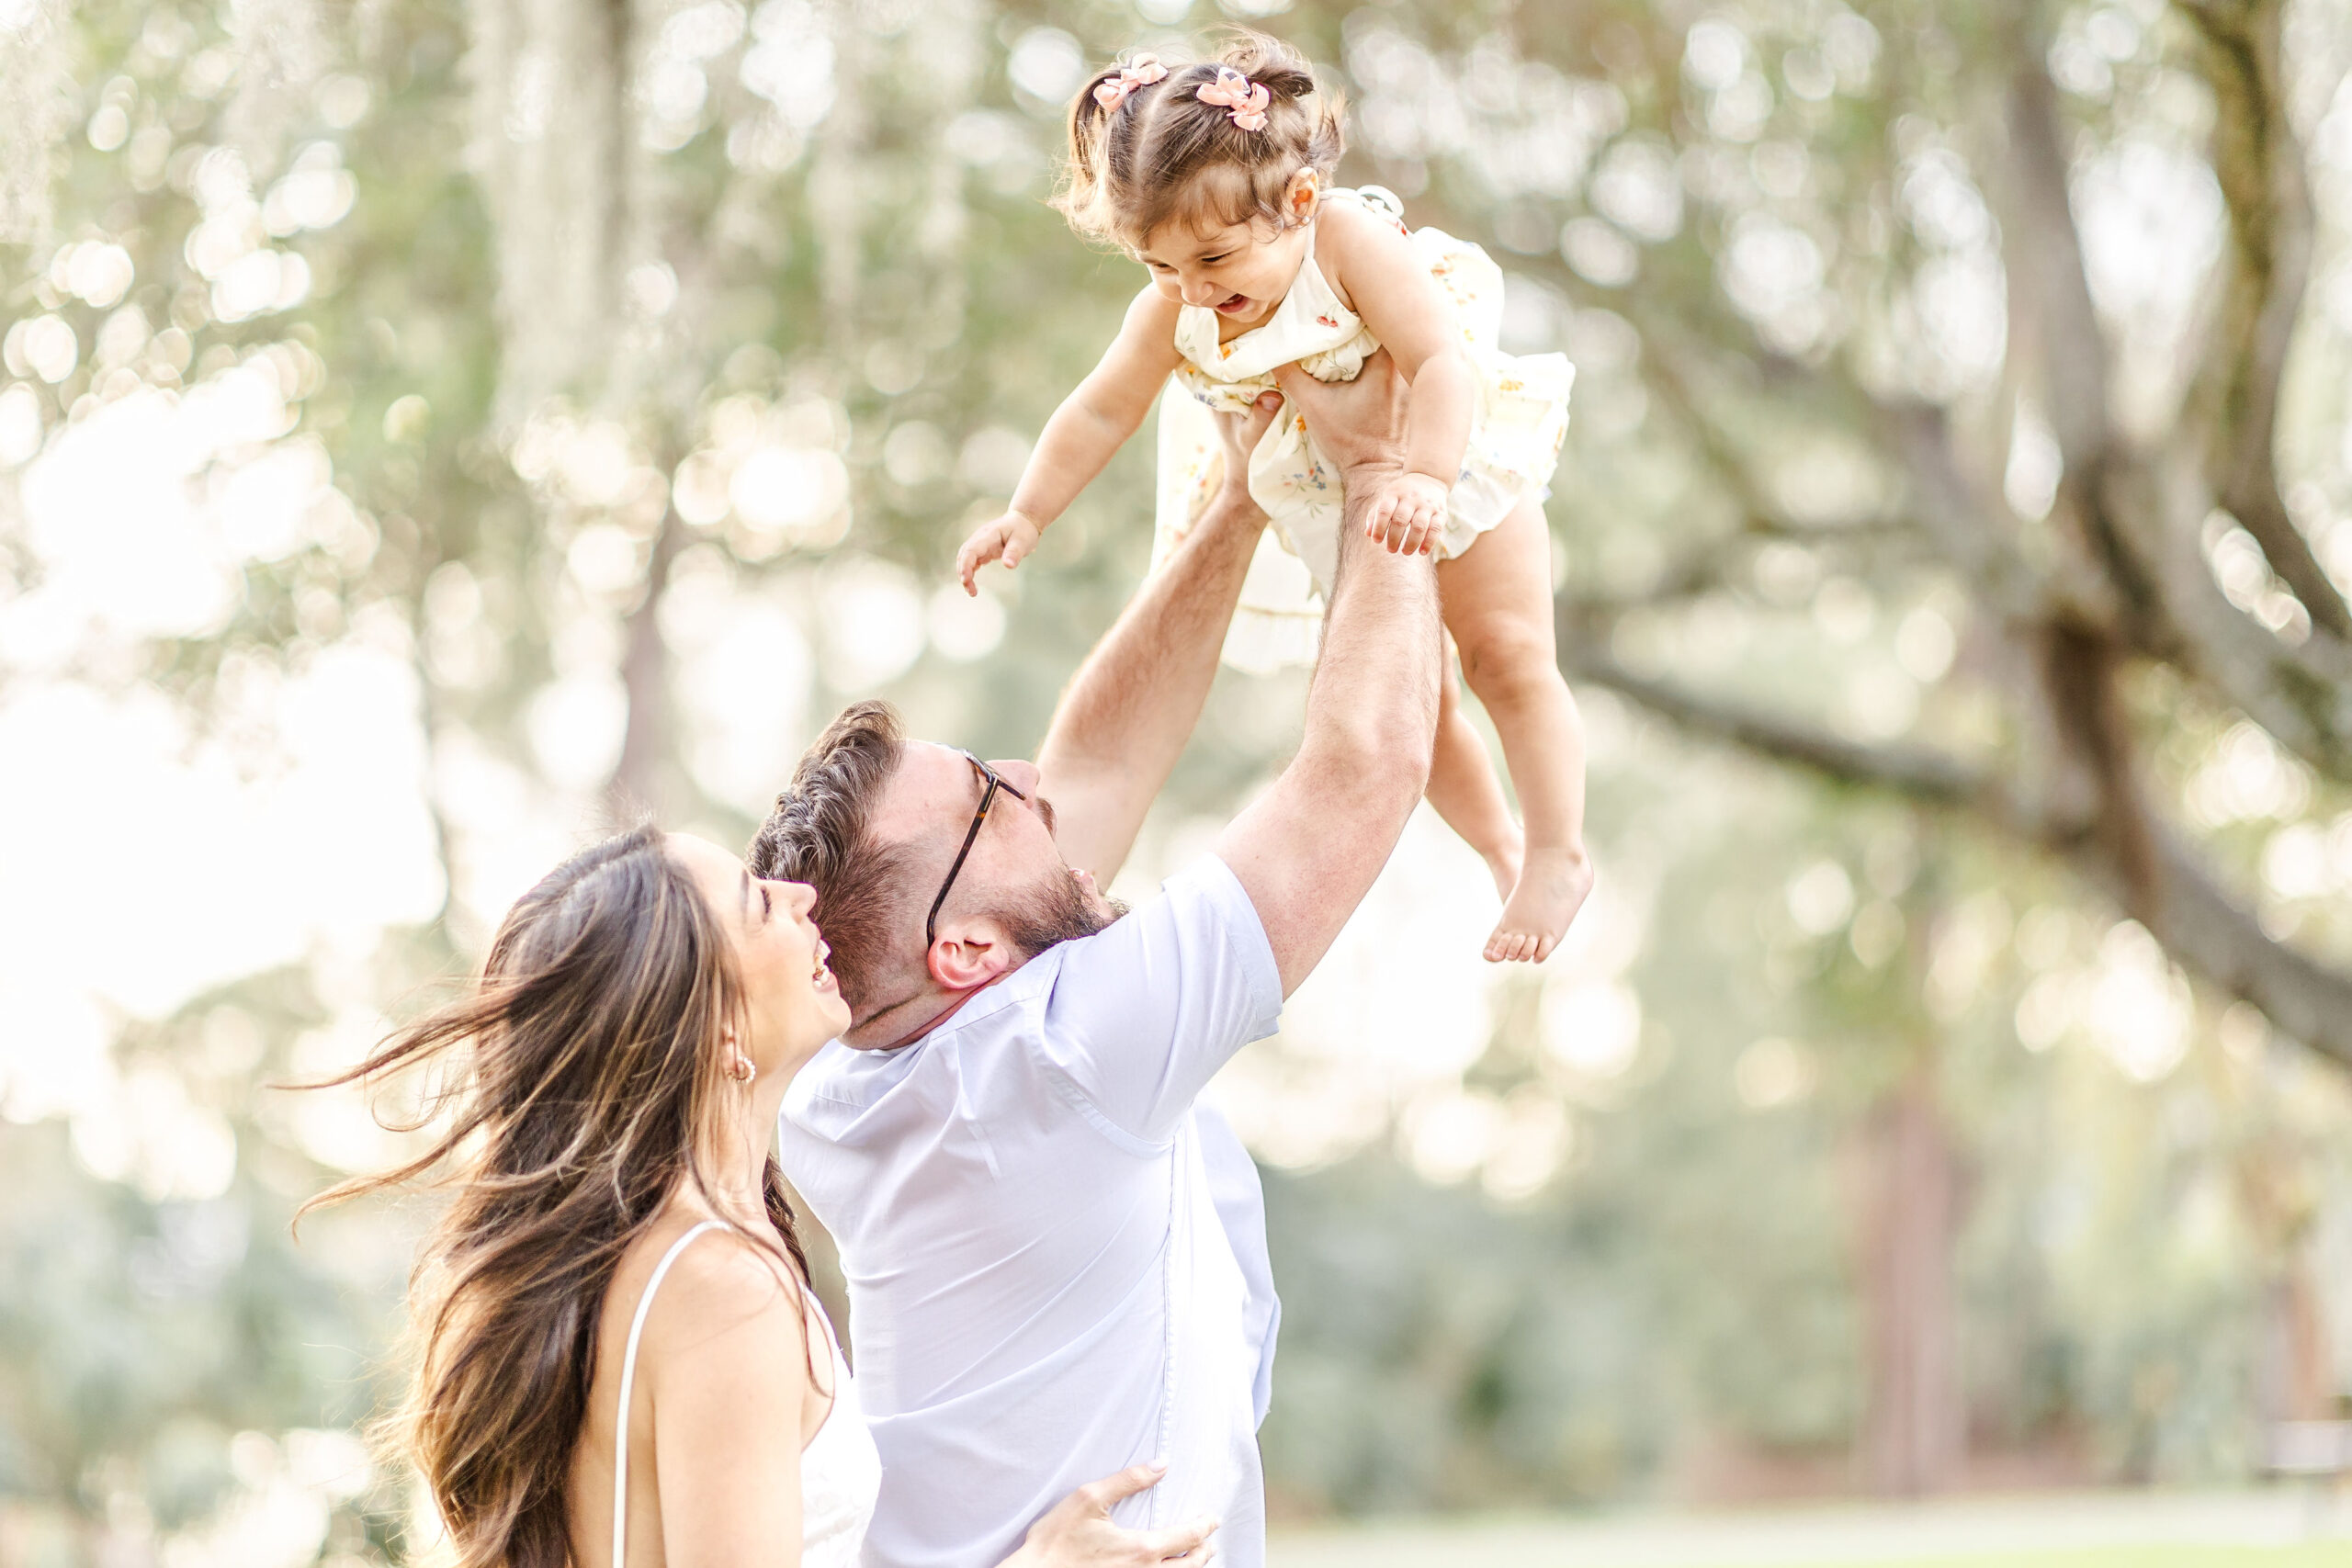 A happy dad laughs with his toddler daughter as he lifts her above his head with mom